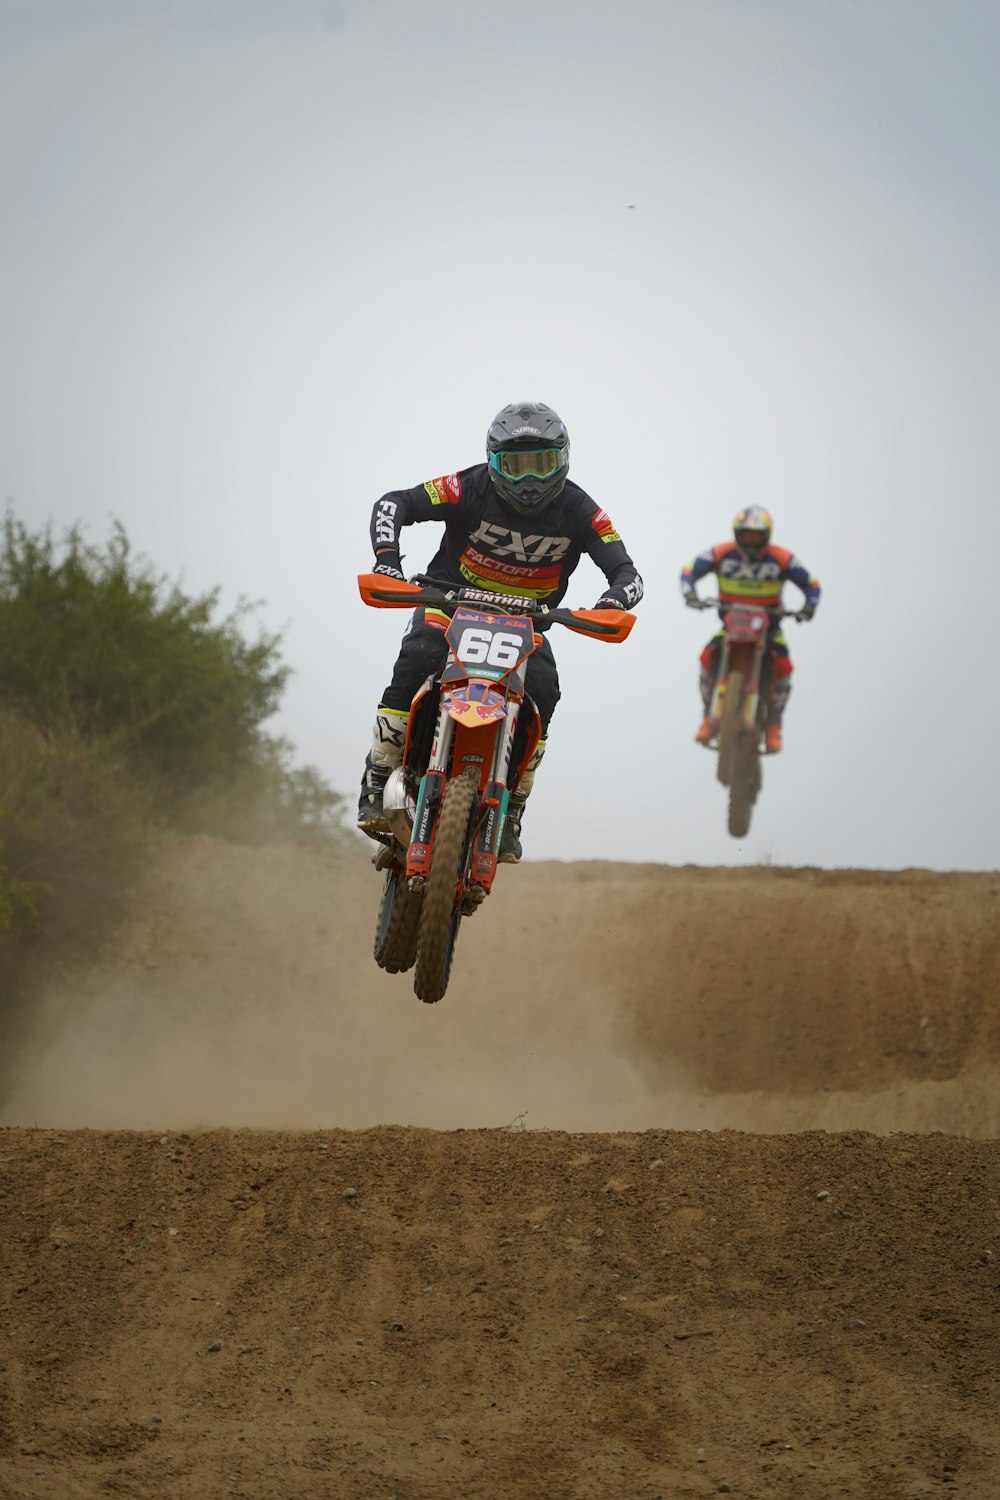 two motorcyclists are racing on a dirt track